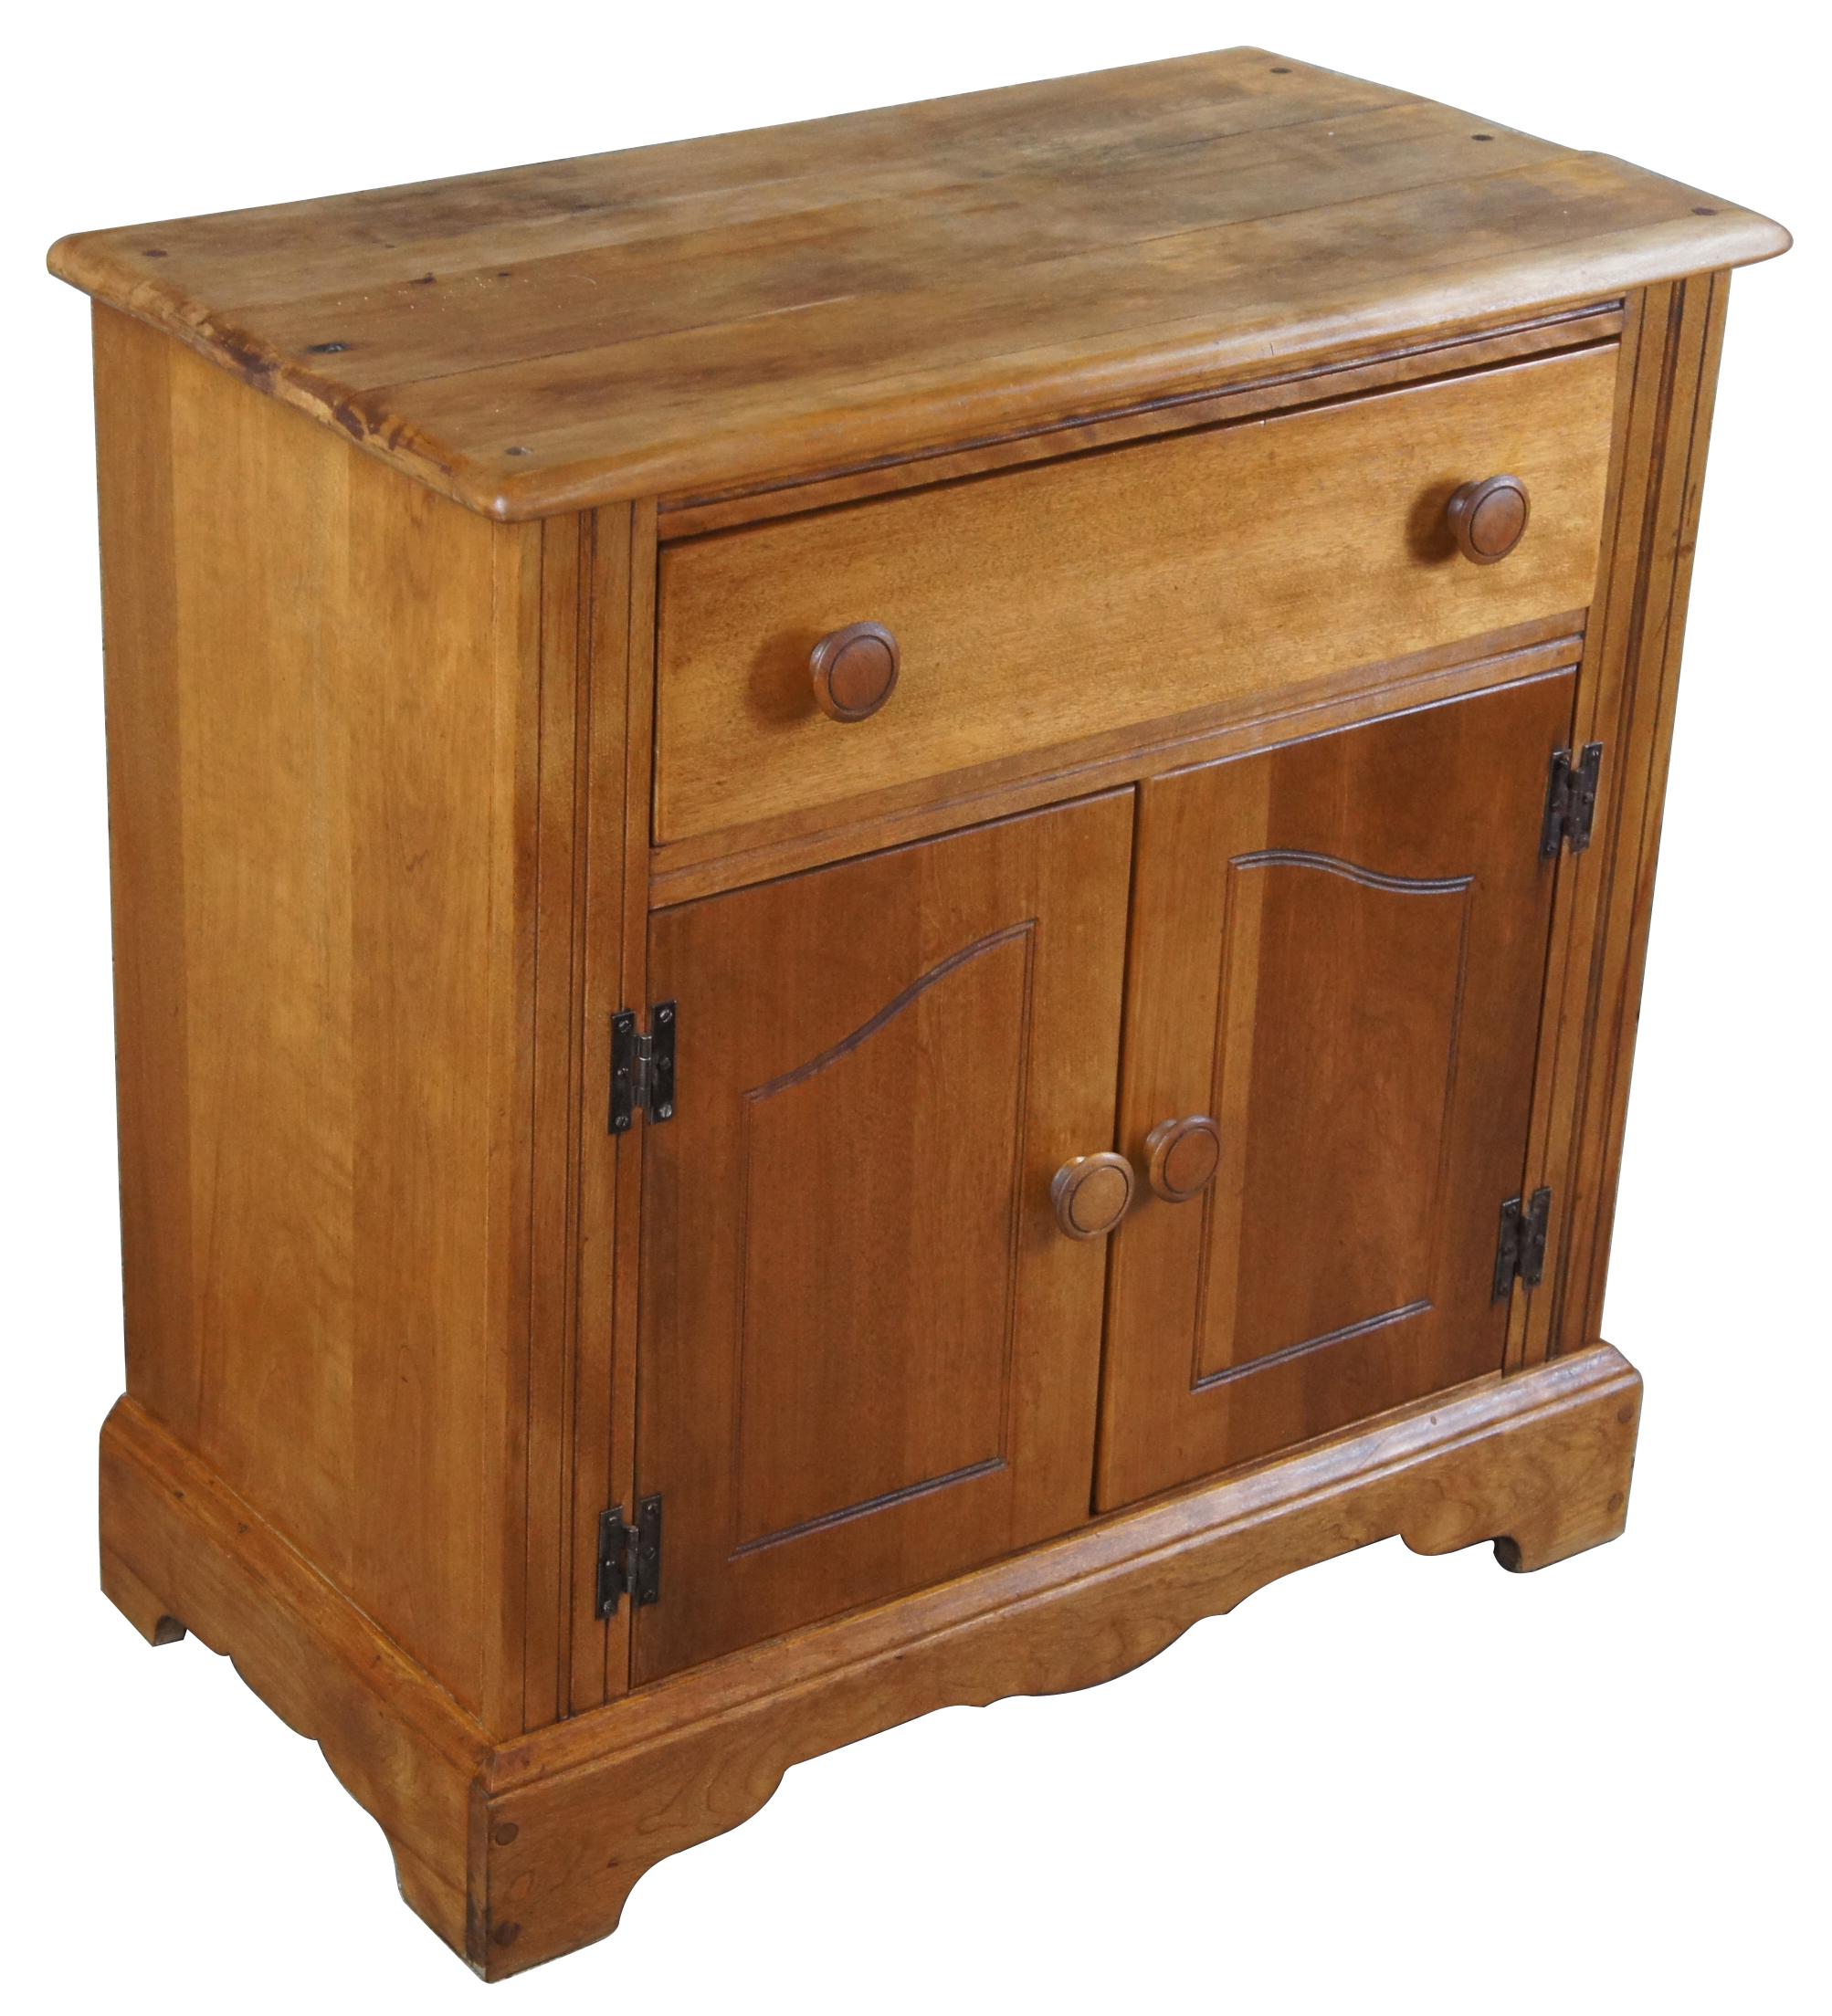 American Country pine cabinet. Features a dovetailed drawer, lower cabinet for storage. The cabinet is supported by bracket feet.